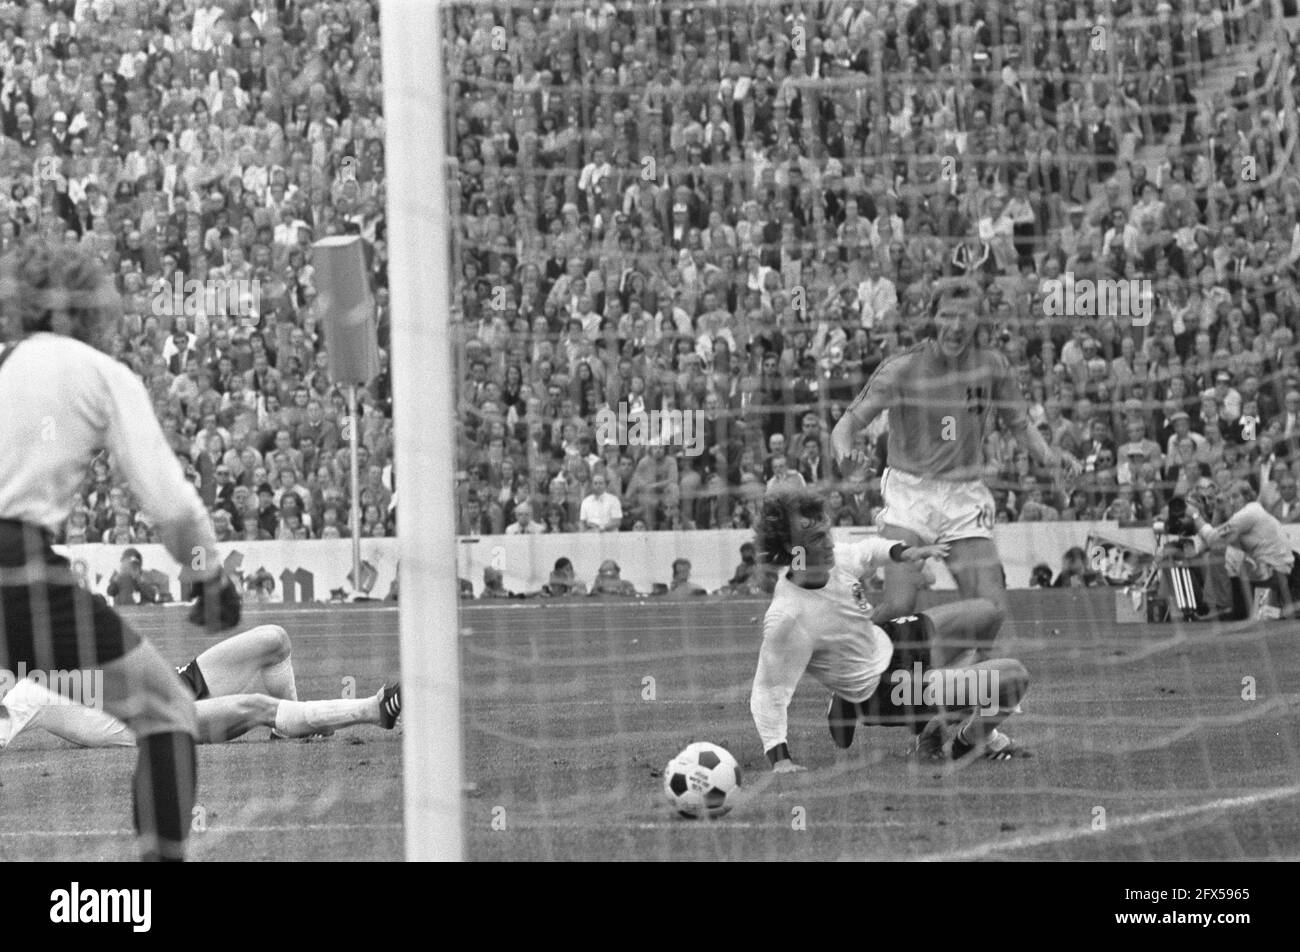 World Cup Final 1974 in Munich, West Germany v. Netherlands 2-1, July 7, 1974, sports, soccer, The Netherlands, 20th century press agency photo, news to remember, documentary, historic photography 1945-1990, visual stories, human history of the Twentieth Century, capturing moments in time Stock Photo